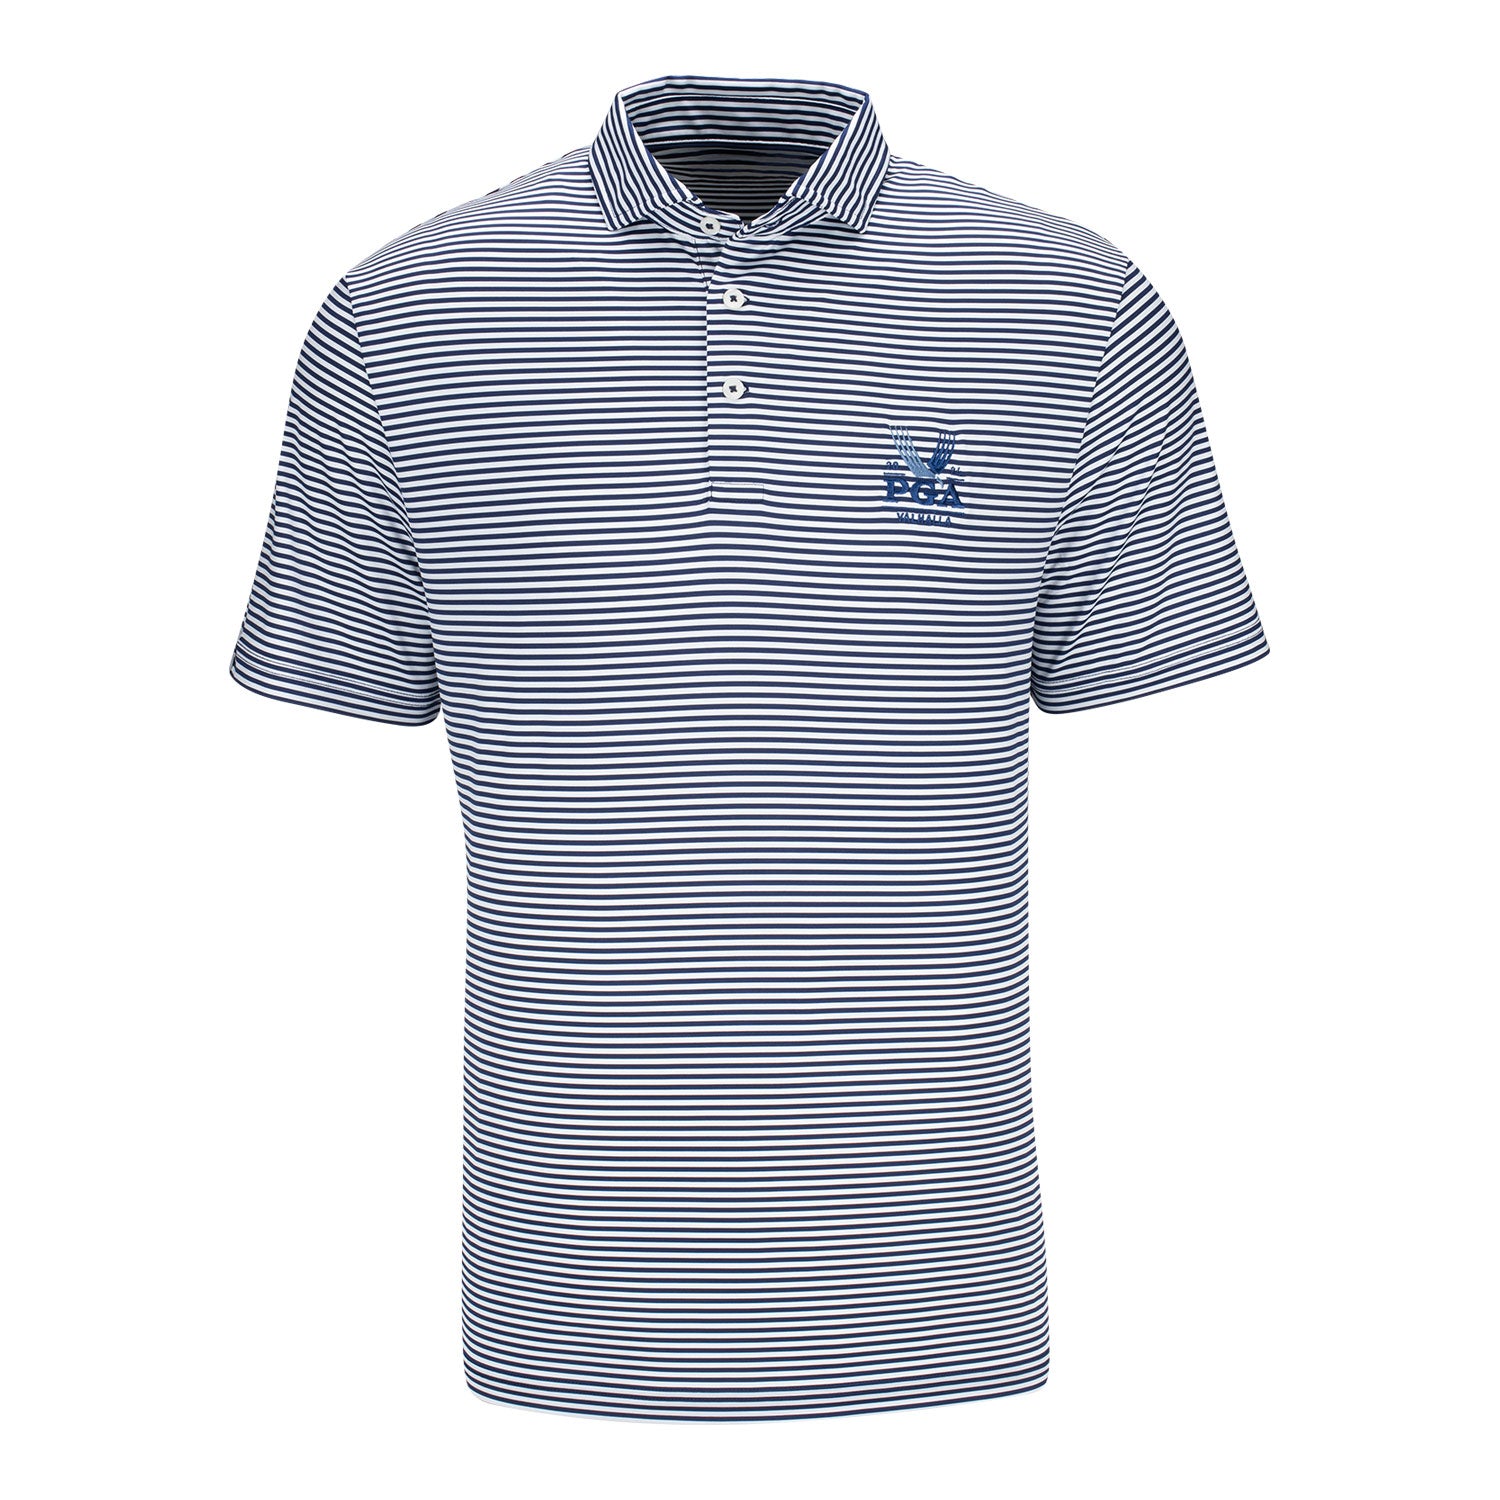 TOUR Championship Under Armour Youth Performance T-Shirt - Navy